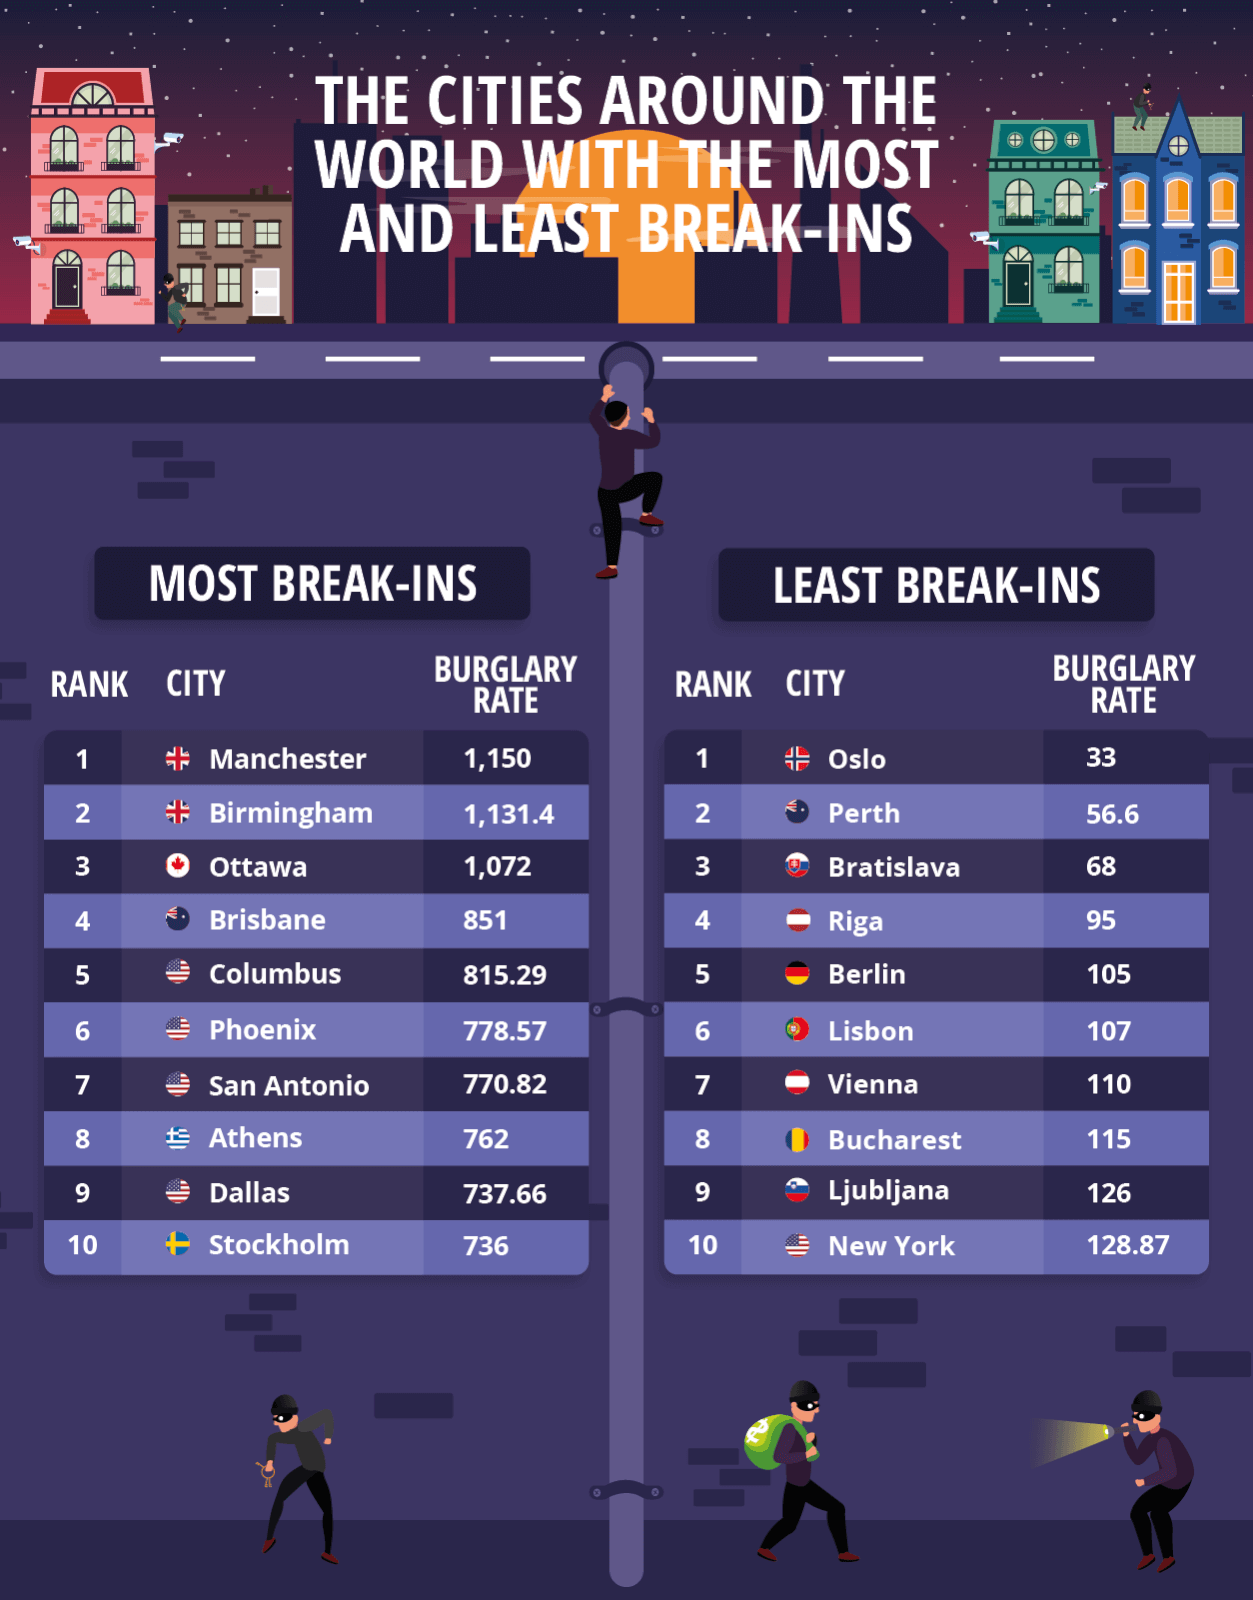 Image showing the cities with the most and least break-ins.